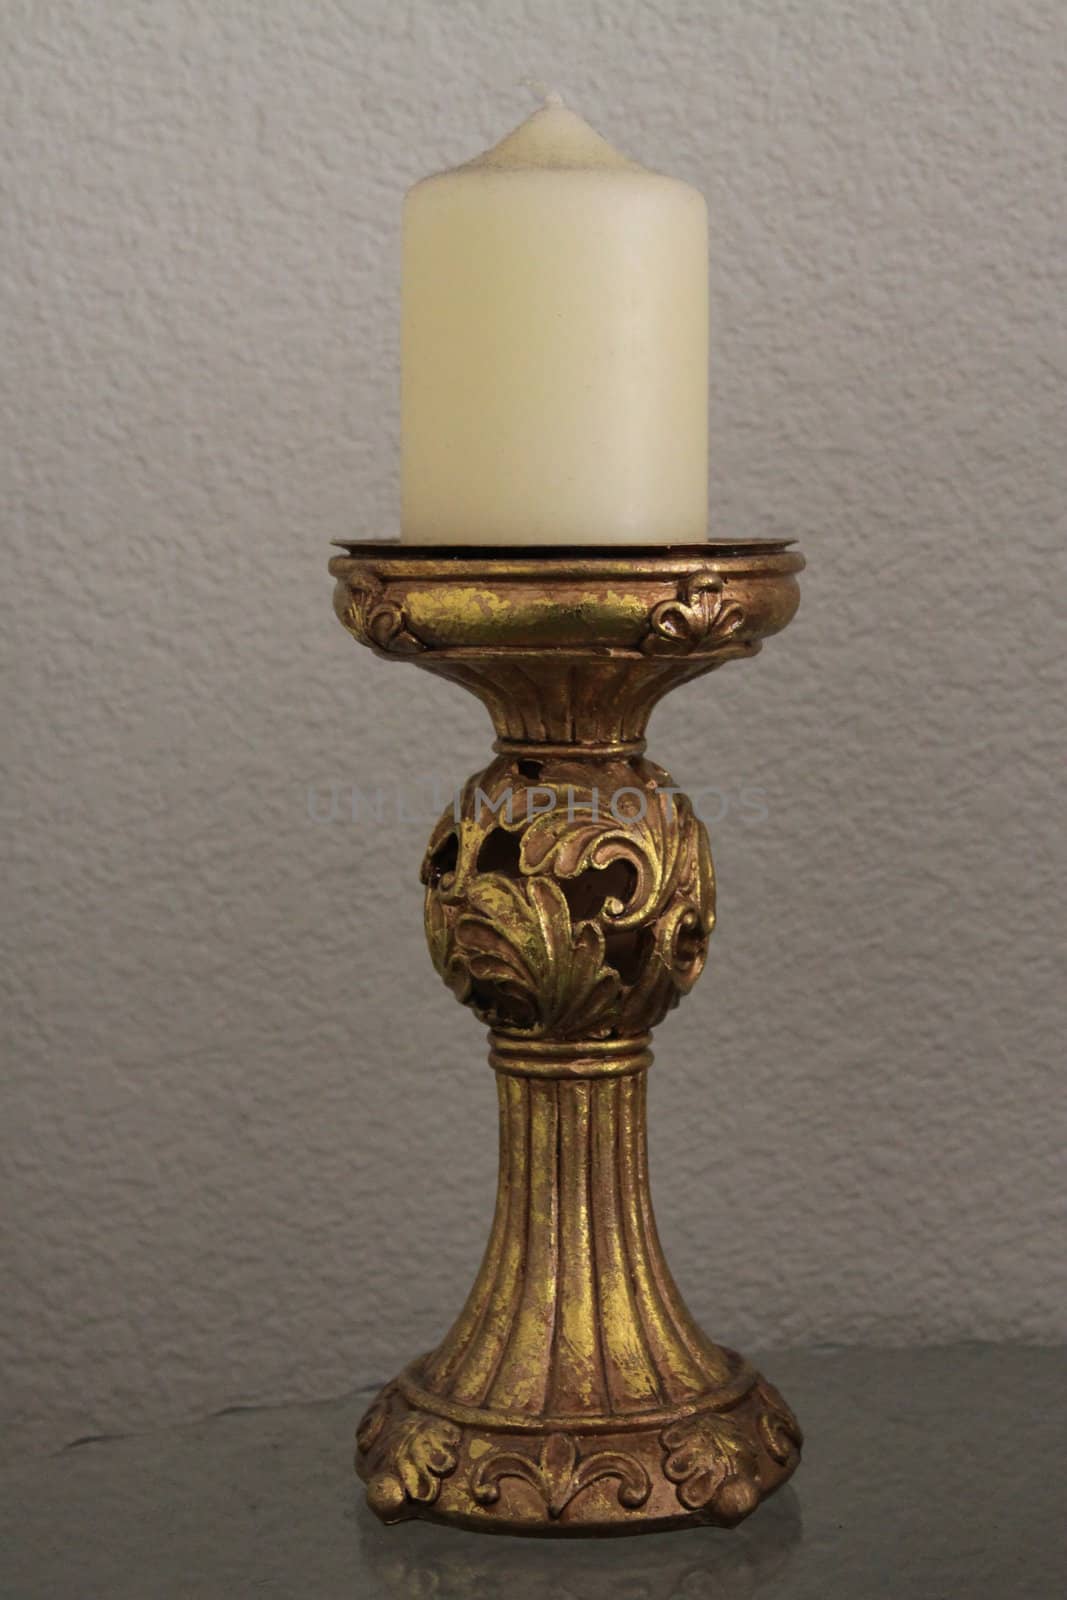 Close up of the candlestick.